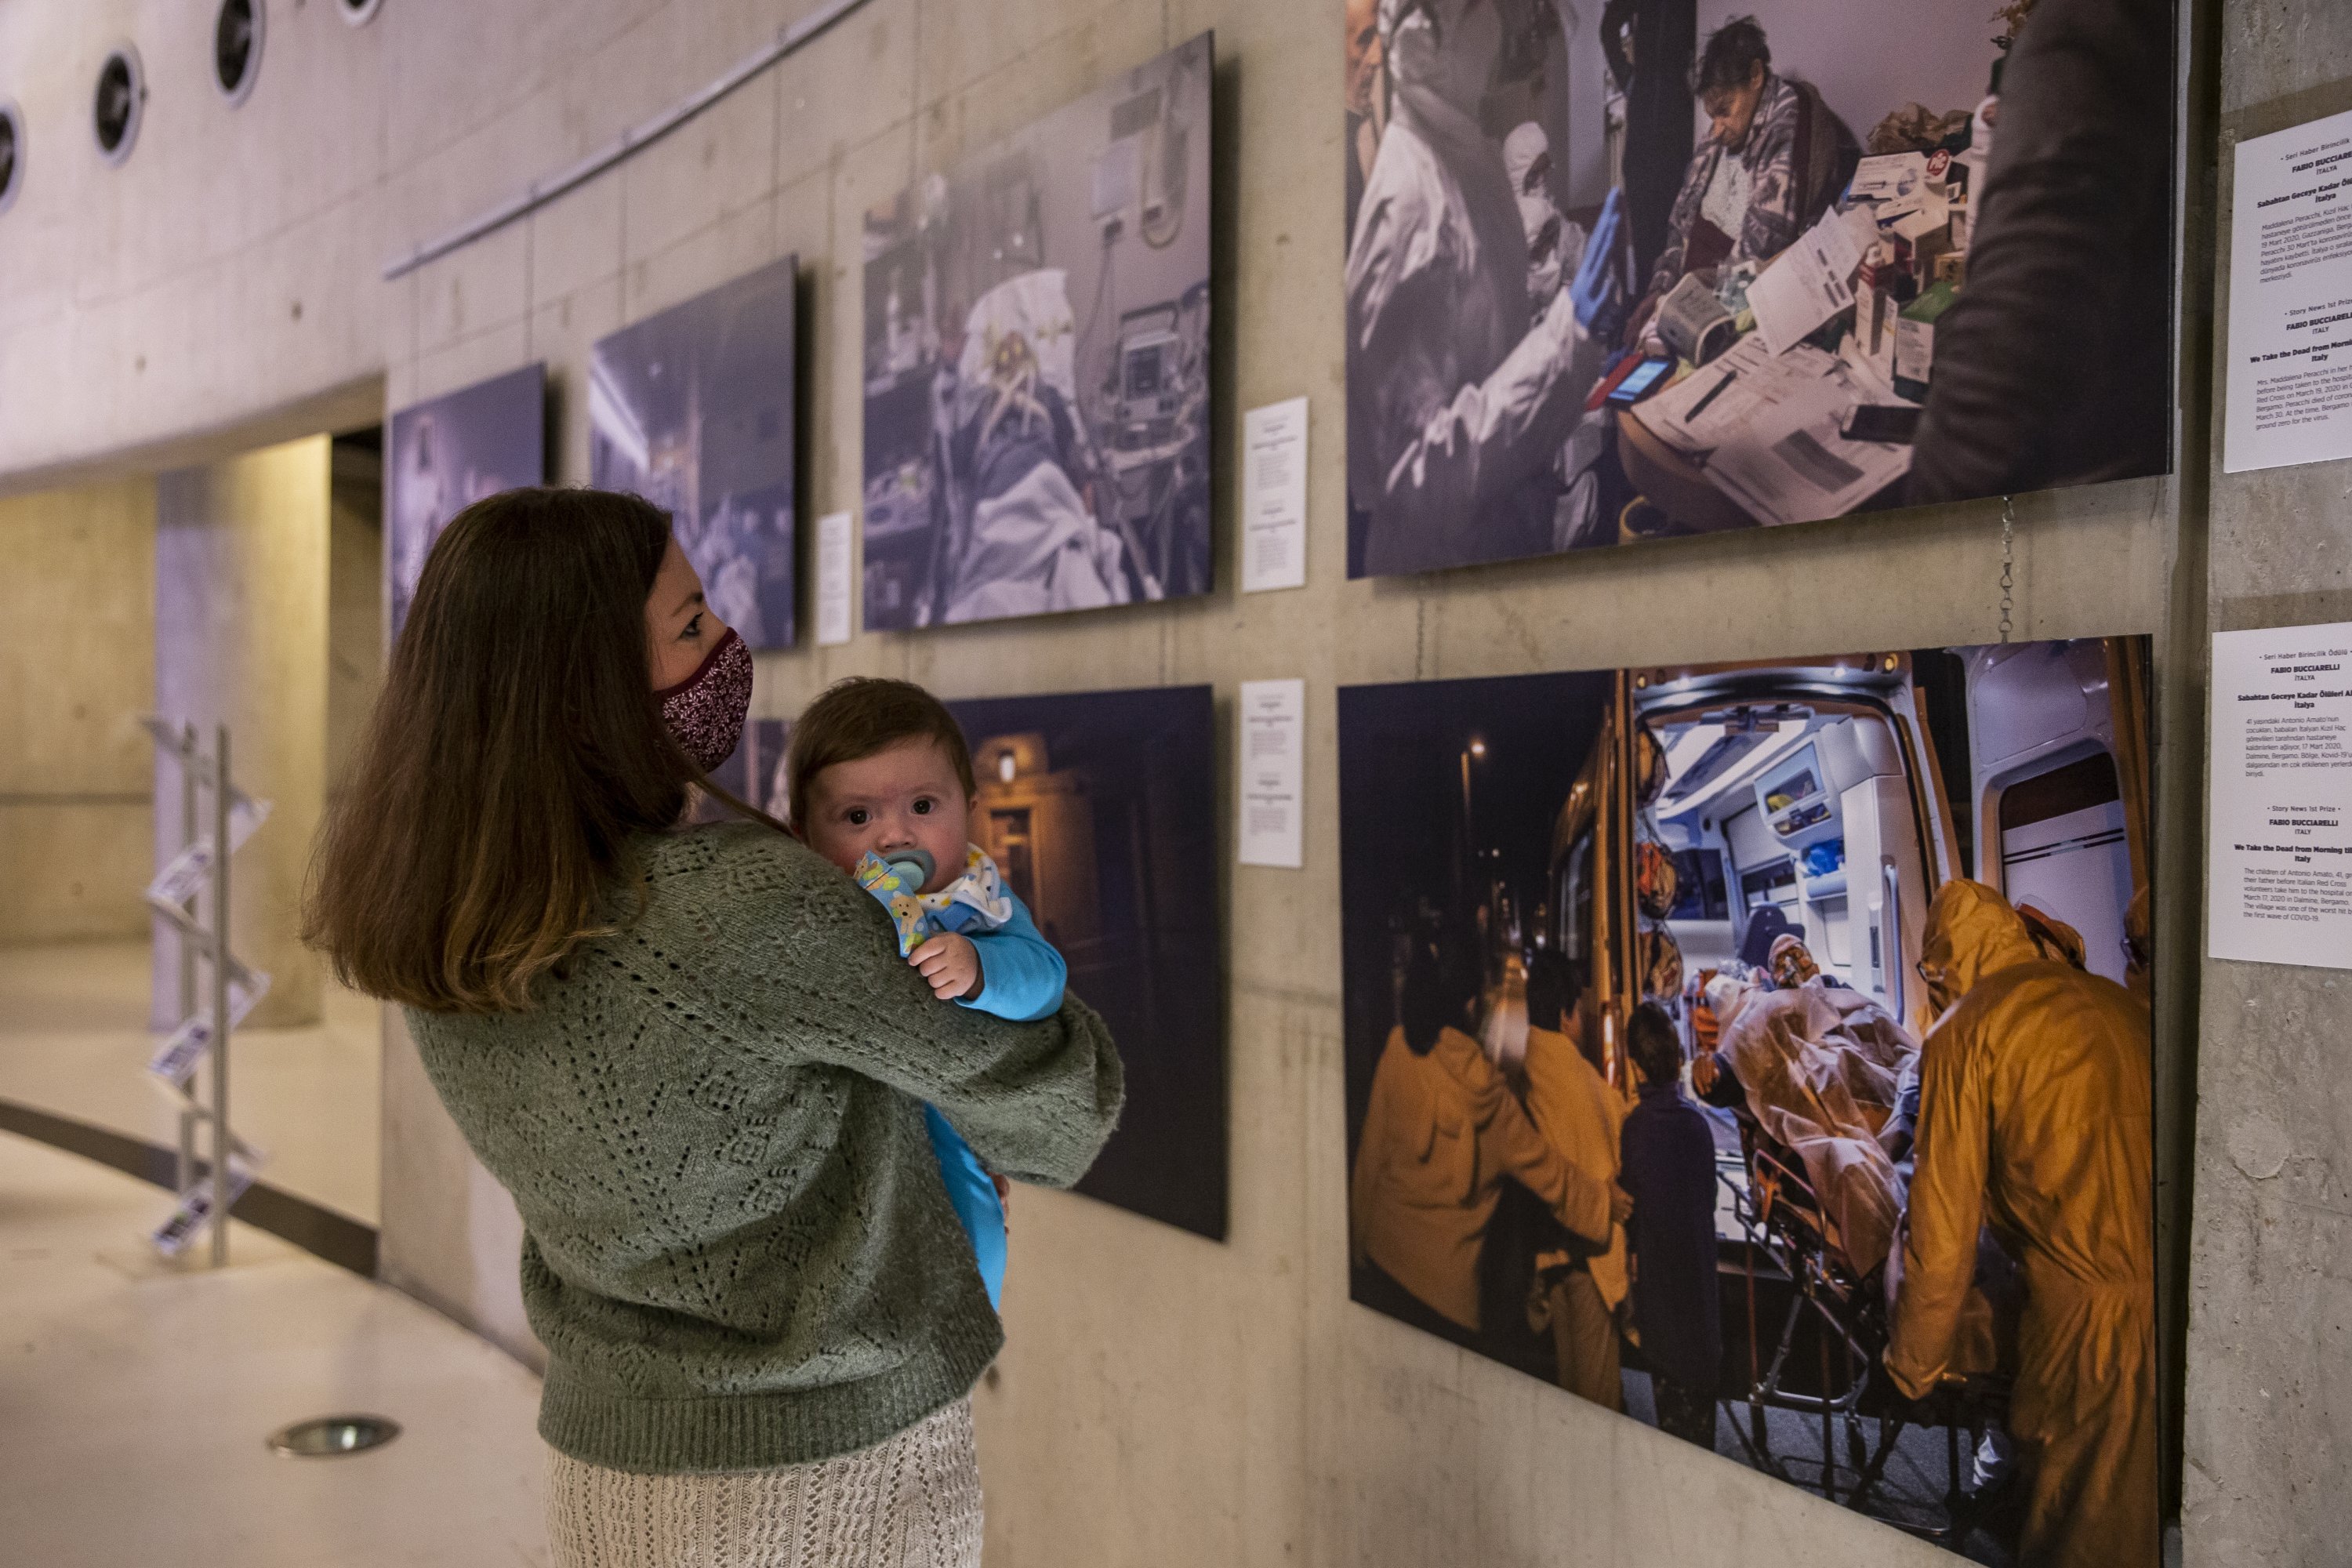 A visitor with her baby examines some photos from the exhibition at the CerModern Arts Center, Ankara, Turkey, October 11, 2021. (AA Photo)